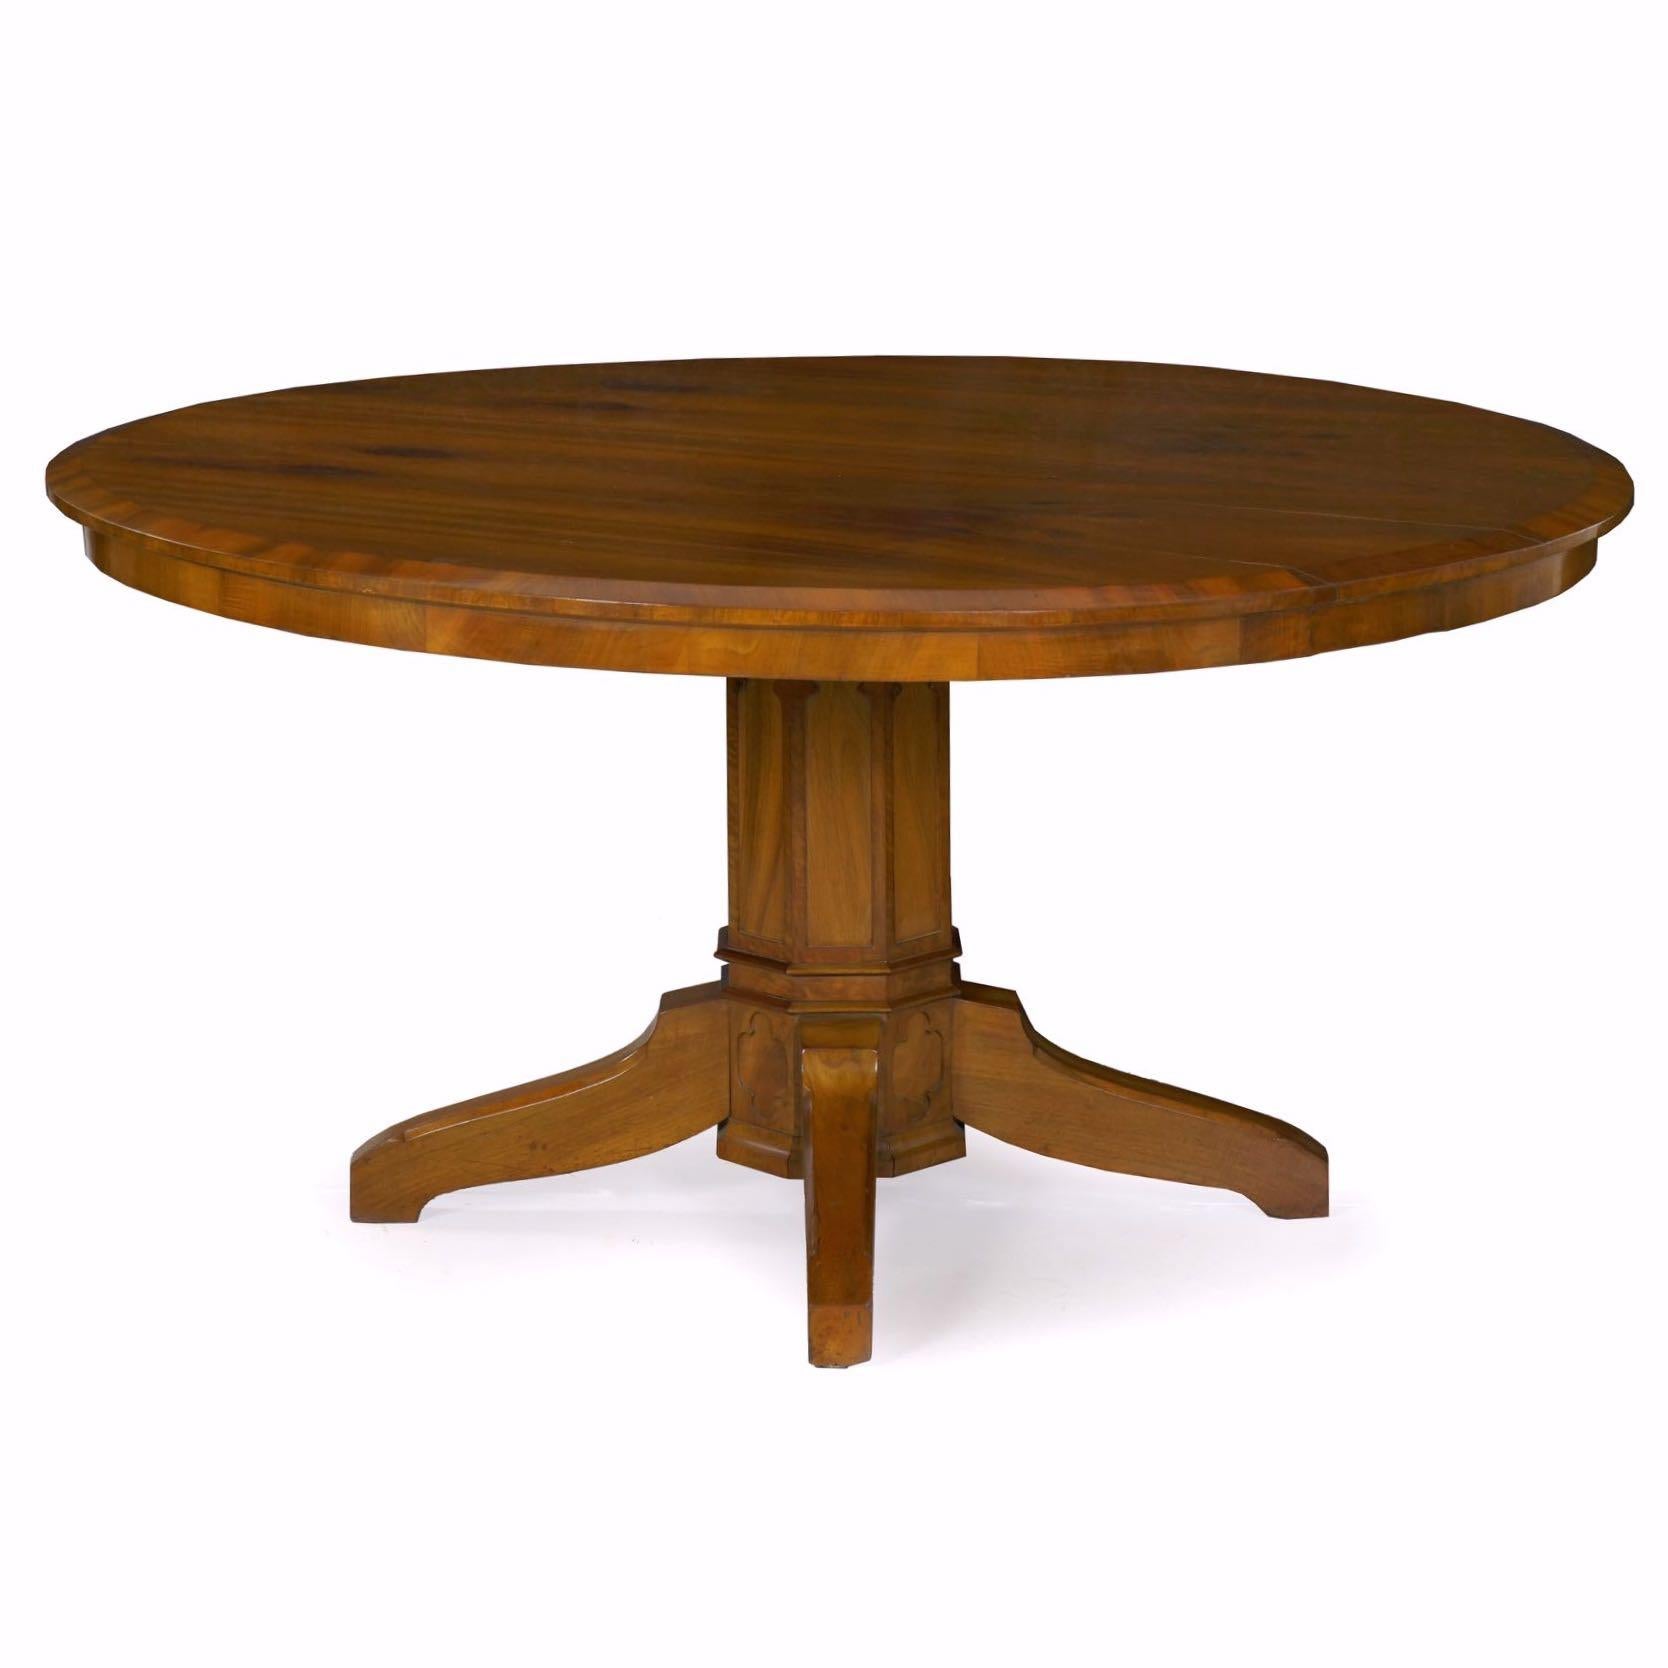 An attractive center table crafted in the austere Biedermeier taste, probably during the last quarter of the 19th century, the top is veneered in figured walnut. The edge is beveled and projects slightly over a thin apron. To allow the piece to